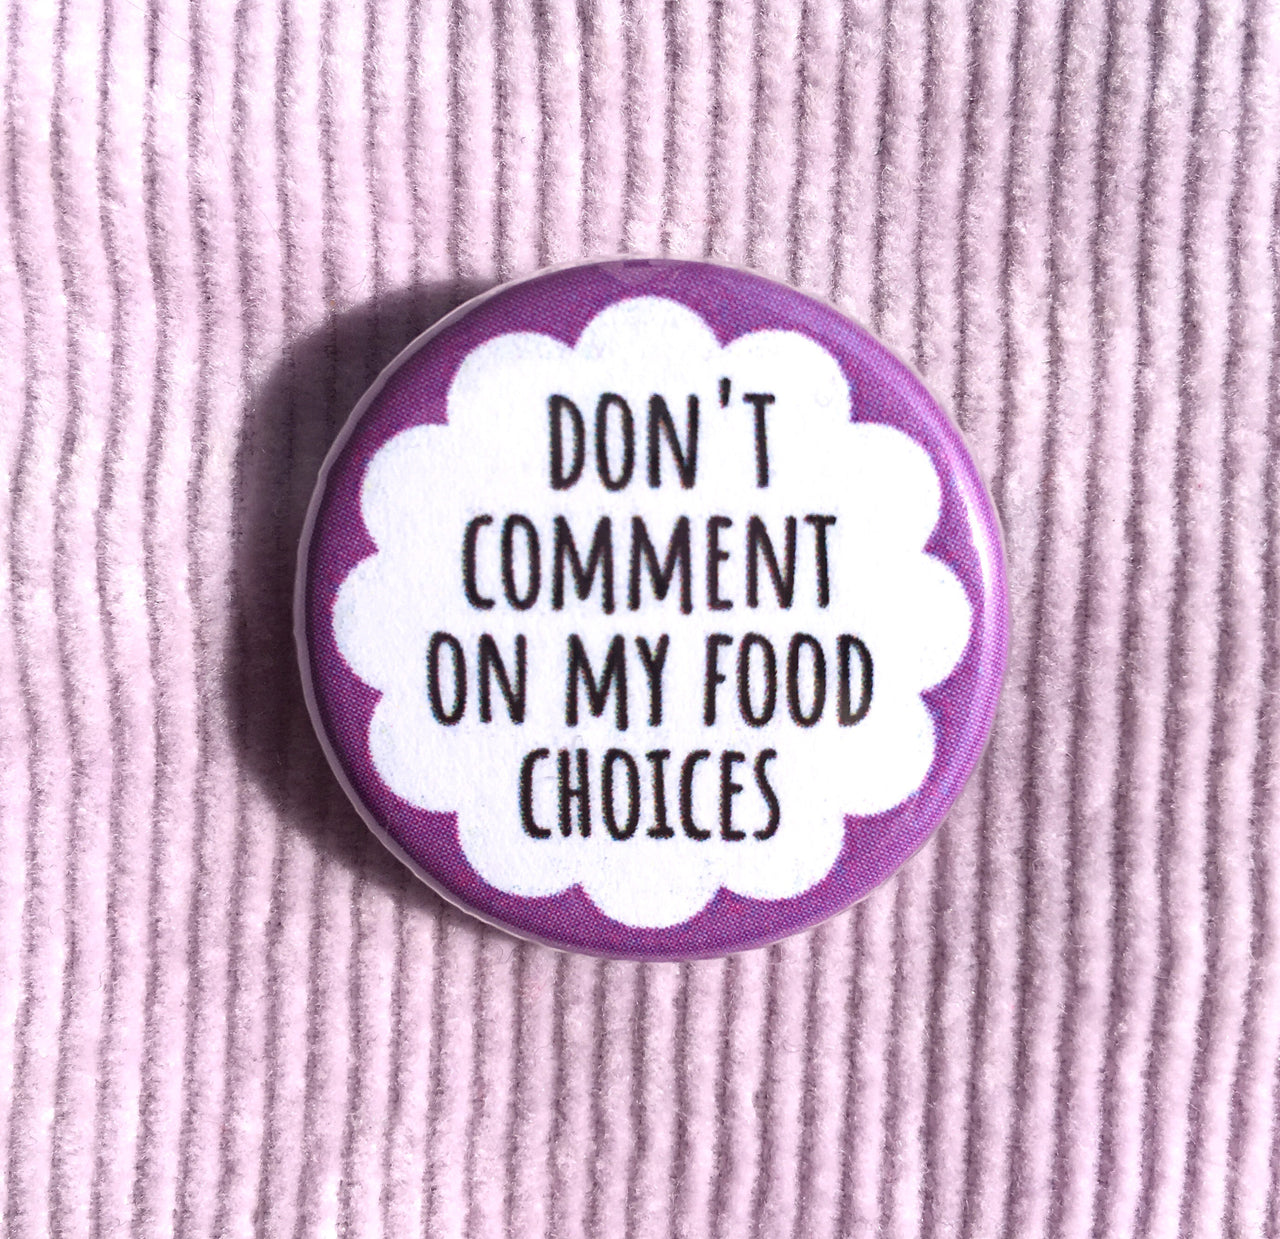 Don’t comment on my food choices - Radical Buttons